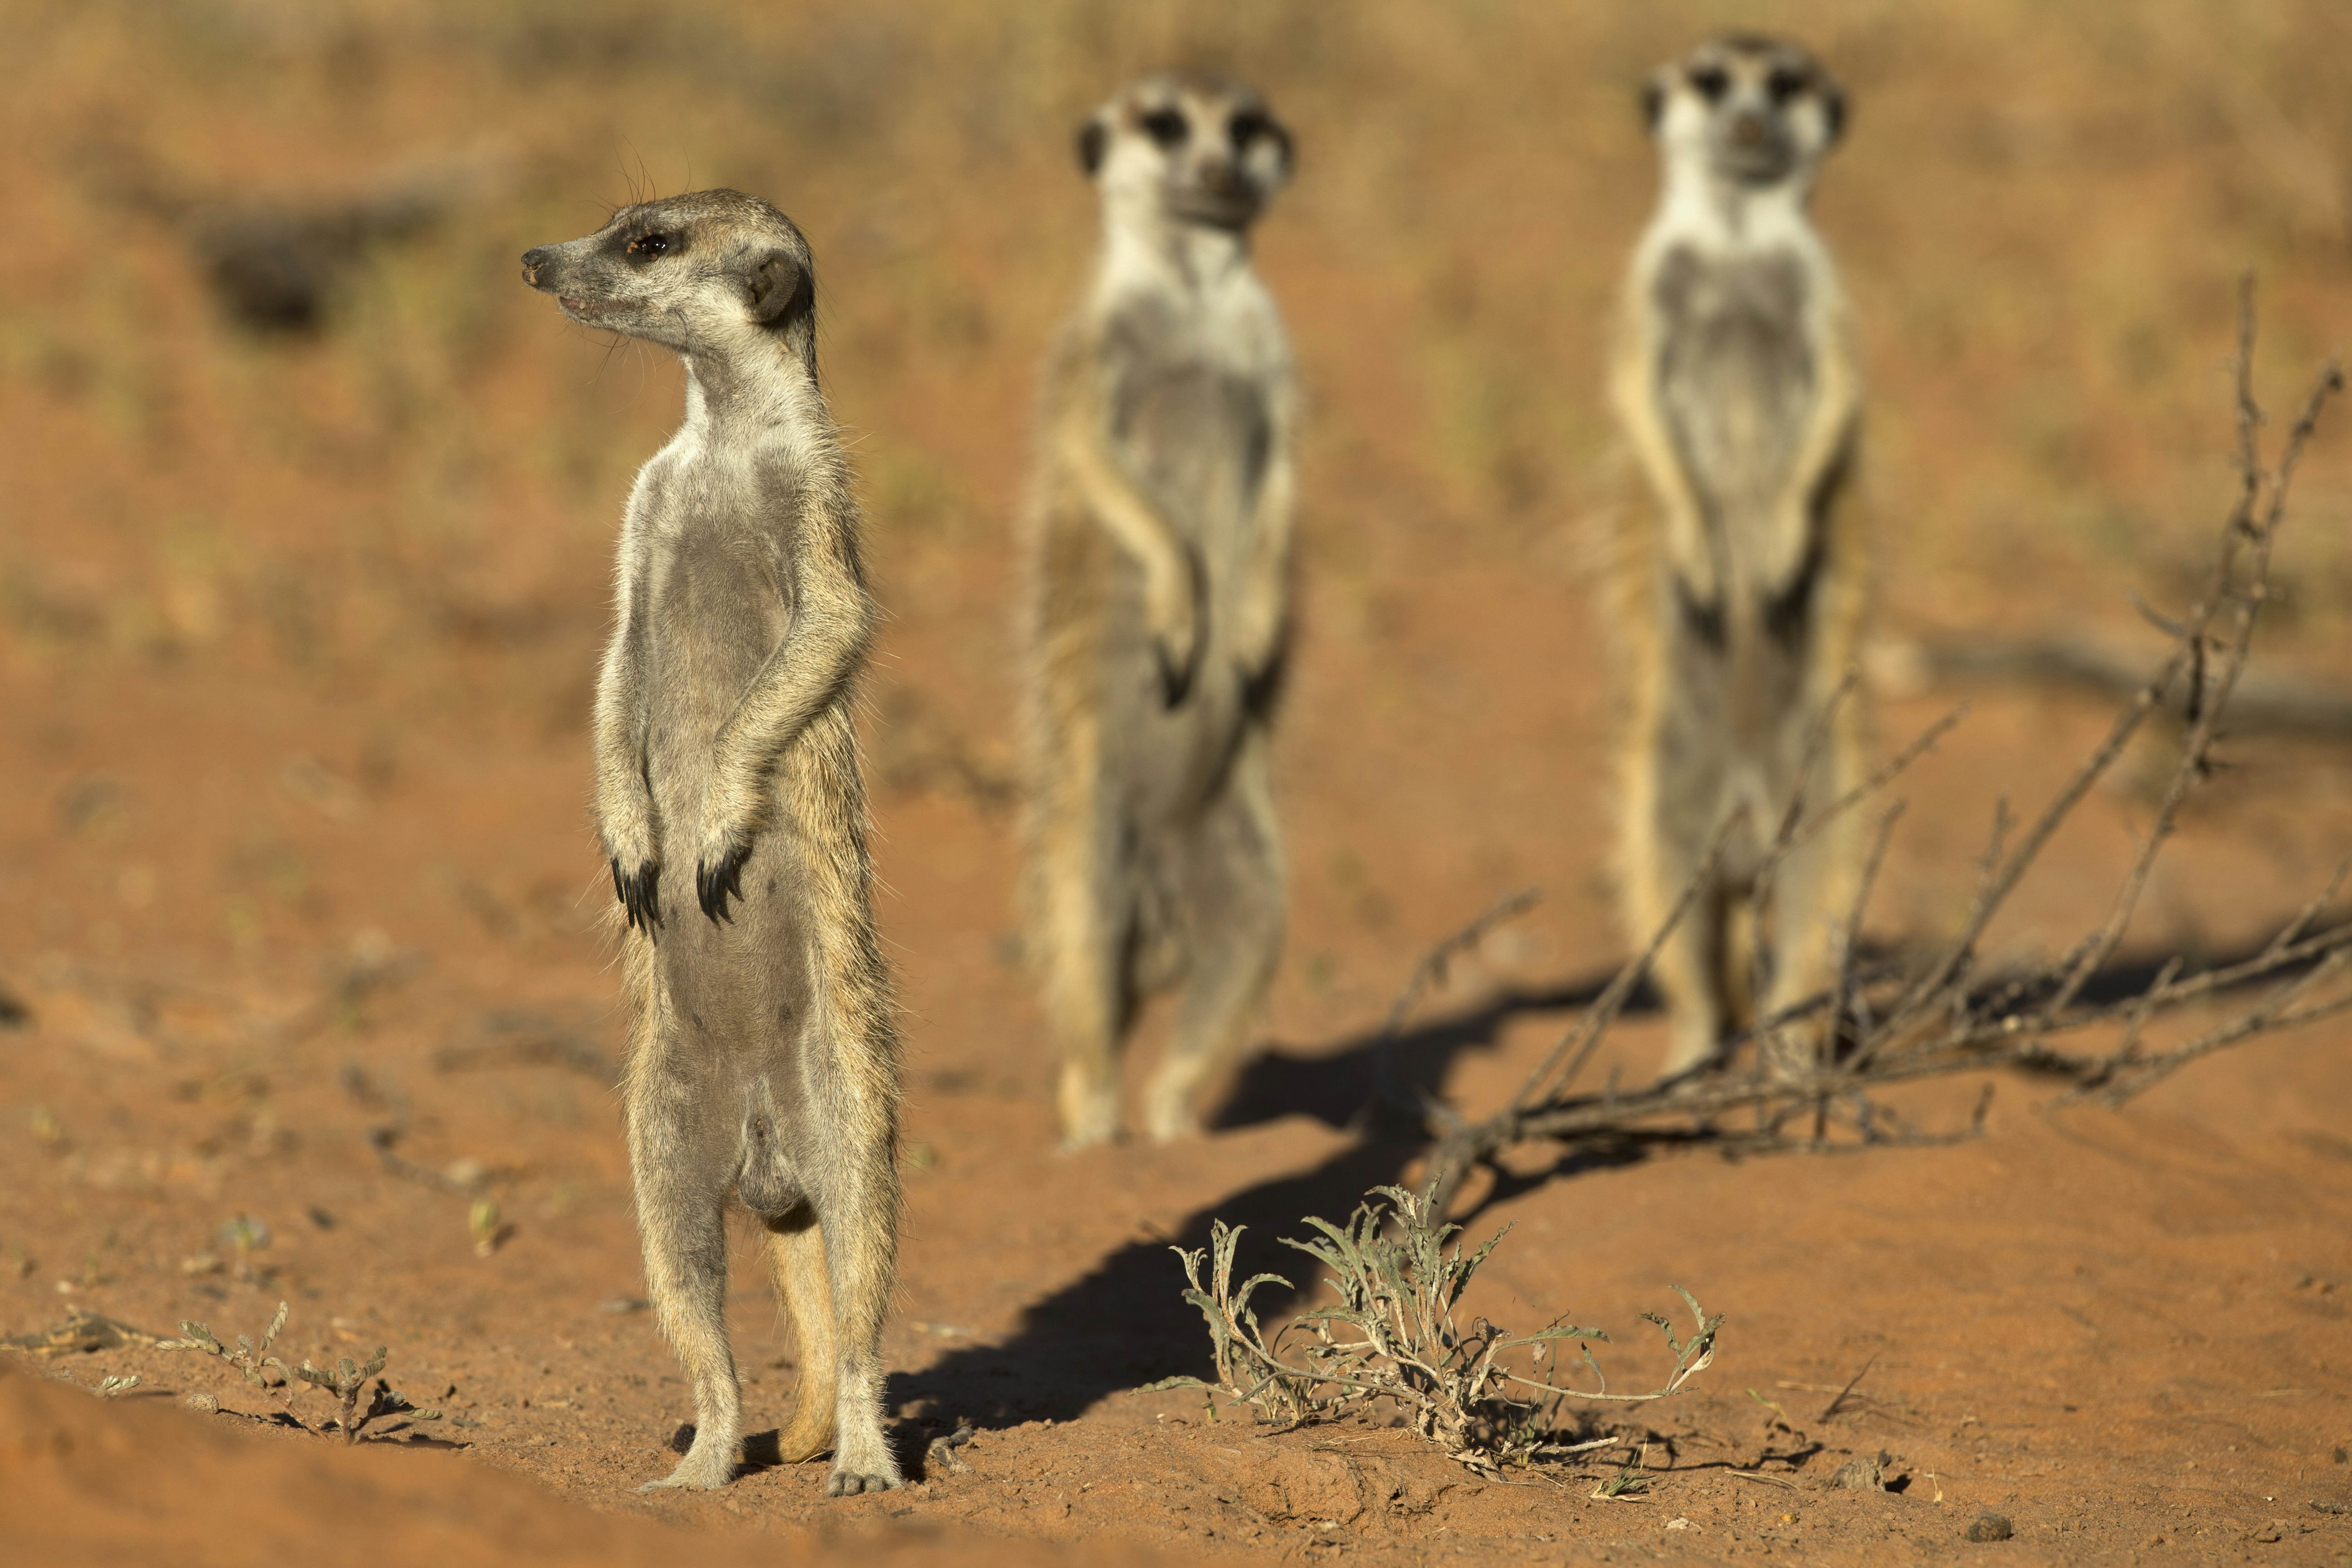 Kgalagadi Transfrontier Park Attractions Lonely Planet